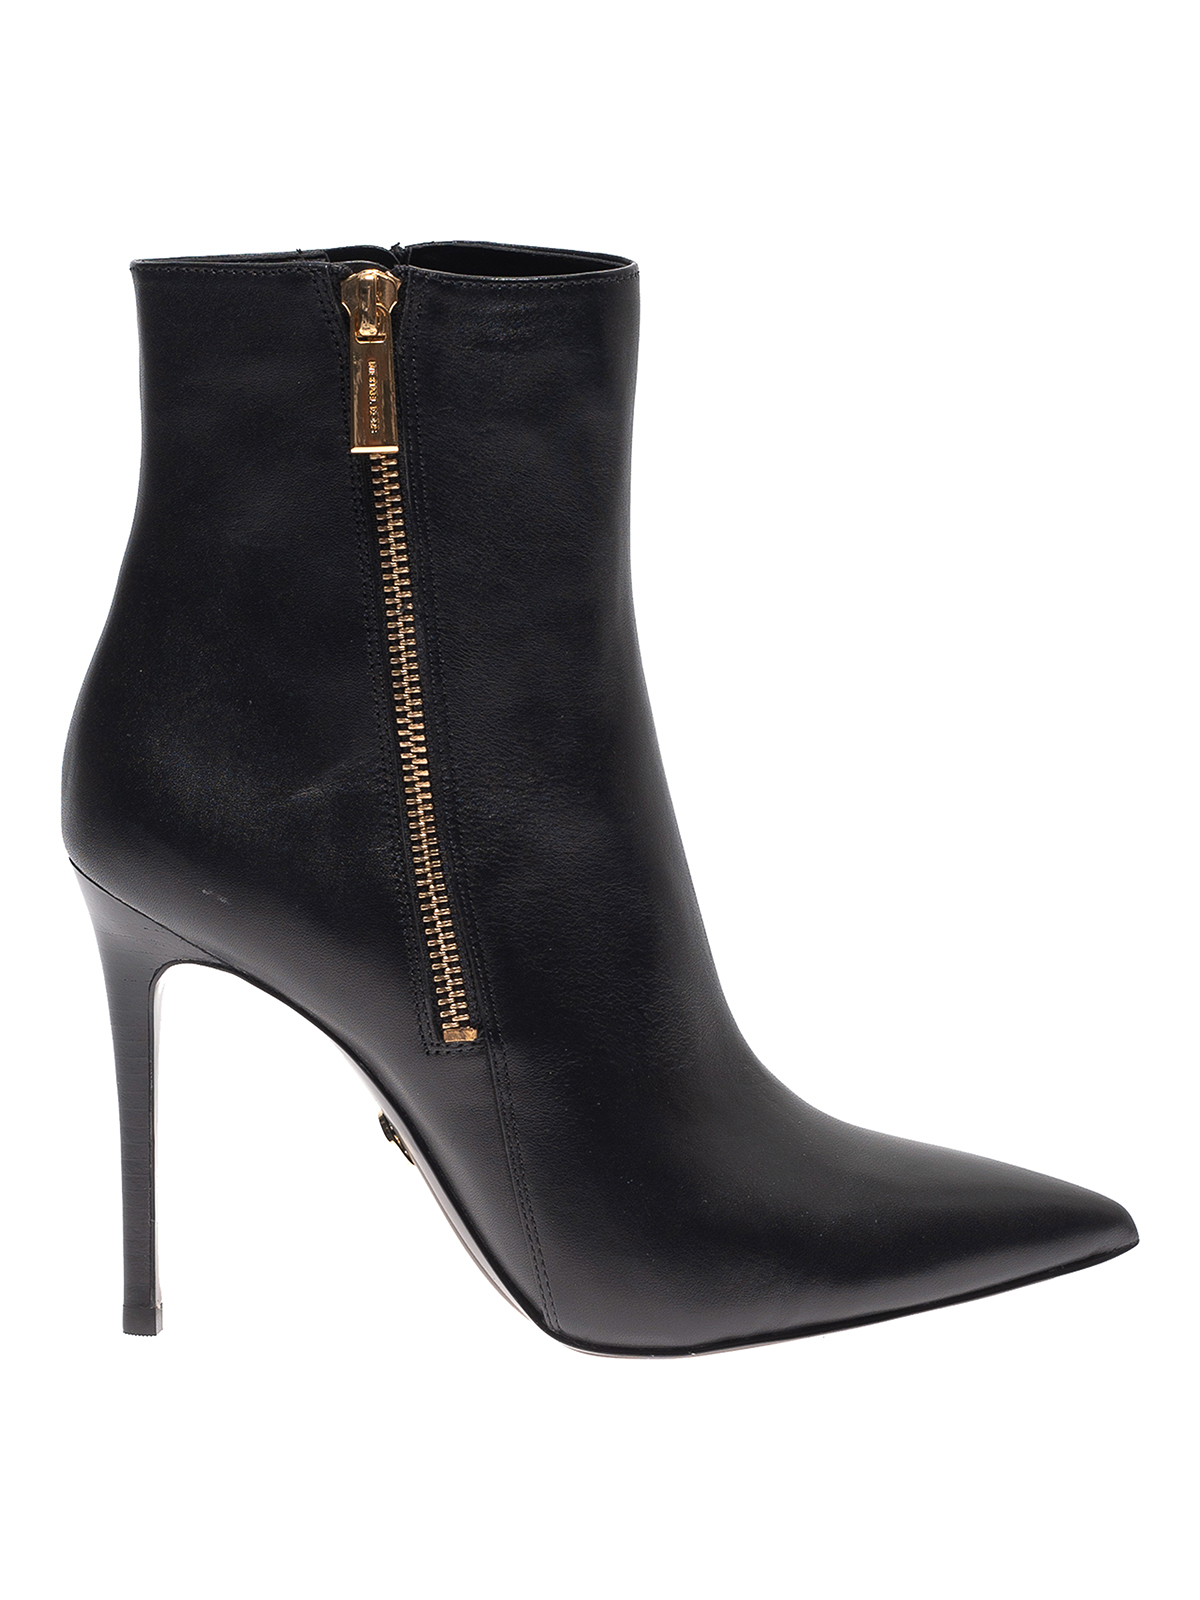 Michael Kors - Keke double zip ankle boots - ankle boots - 40F9KEHE6L001